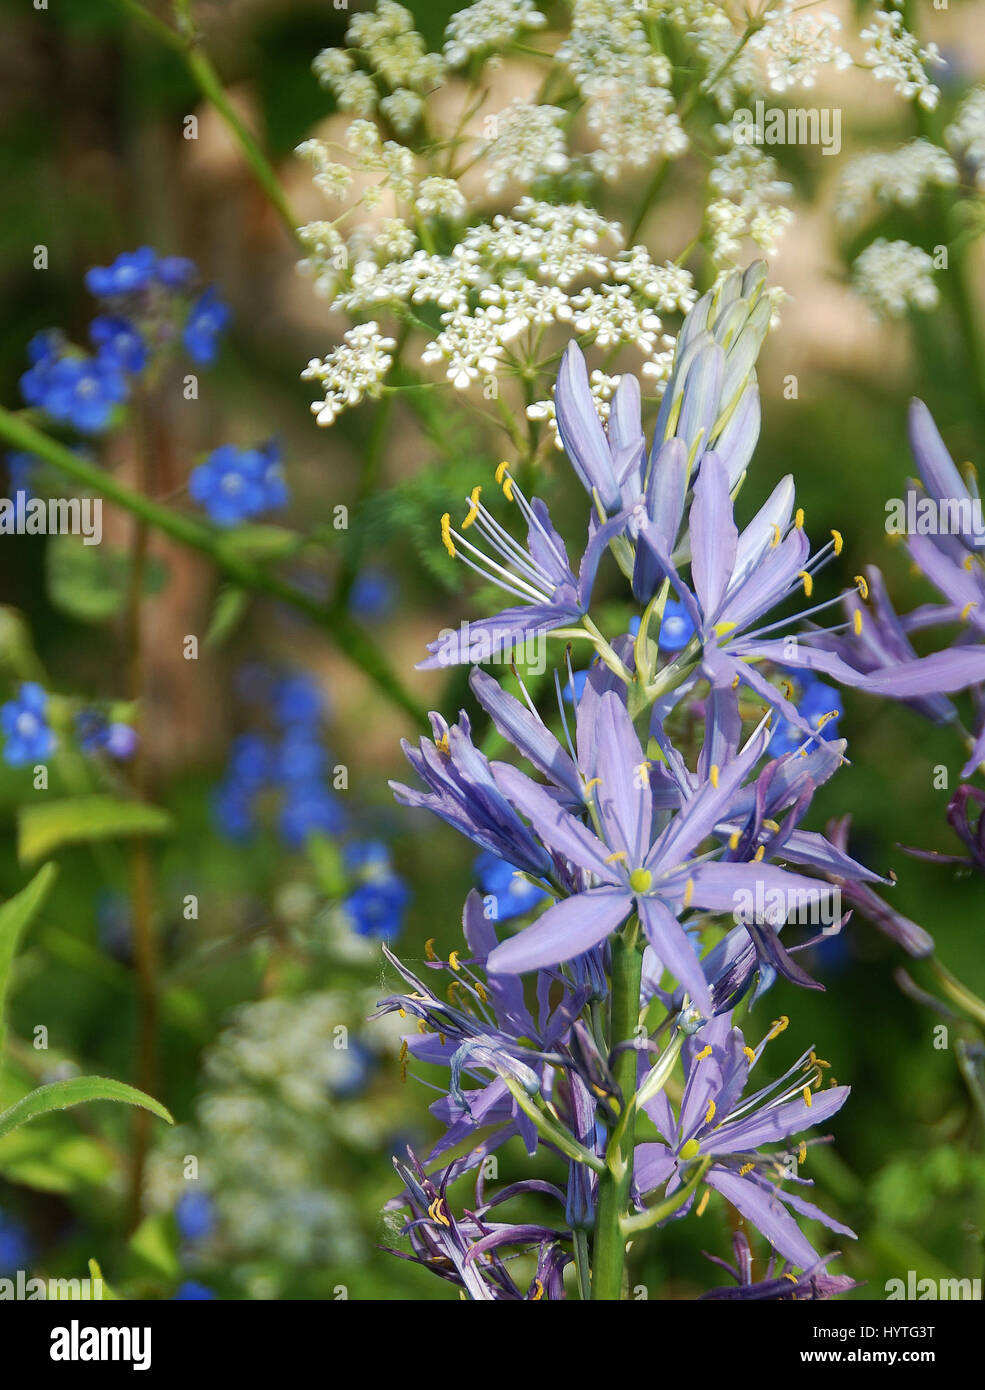 Camassia leichtlinii ssp. suksdorfii caerulea also known as Camassia quamash  Racemes of violet-blue star-shaped flowers set off by white cow parsley  Stock Photo